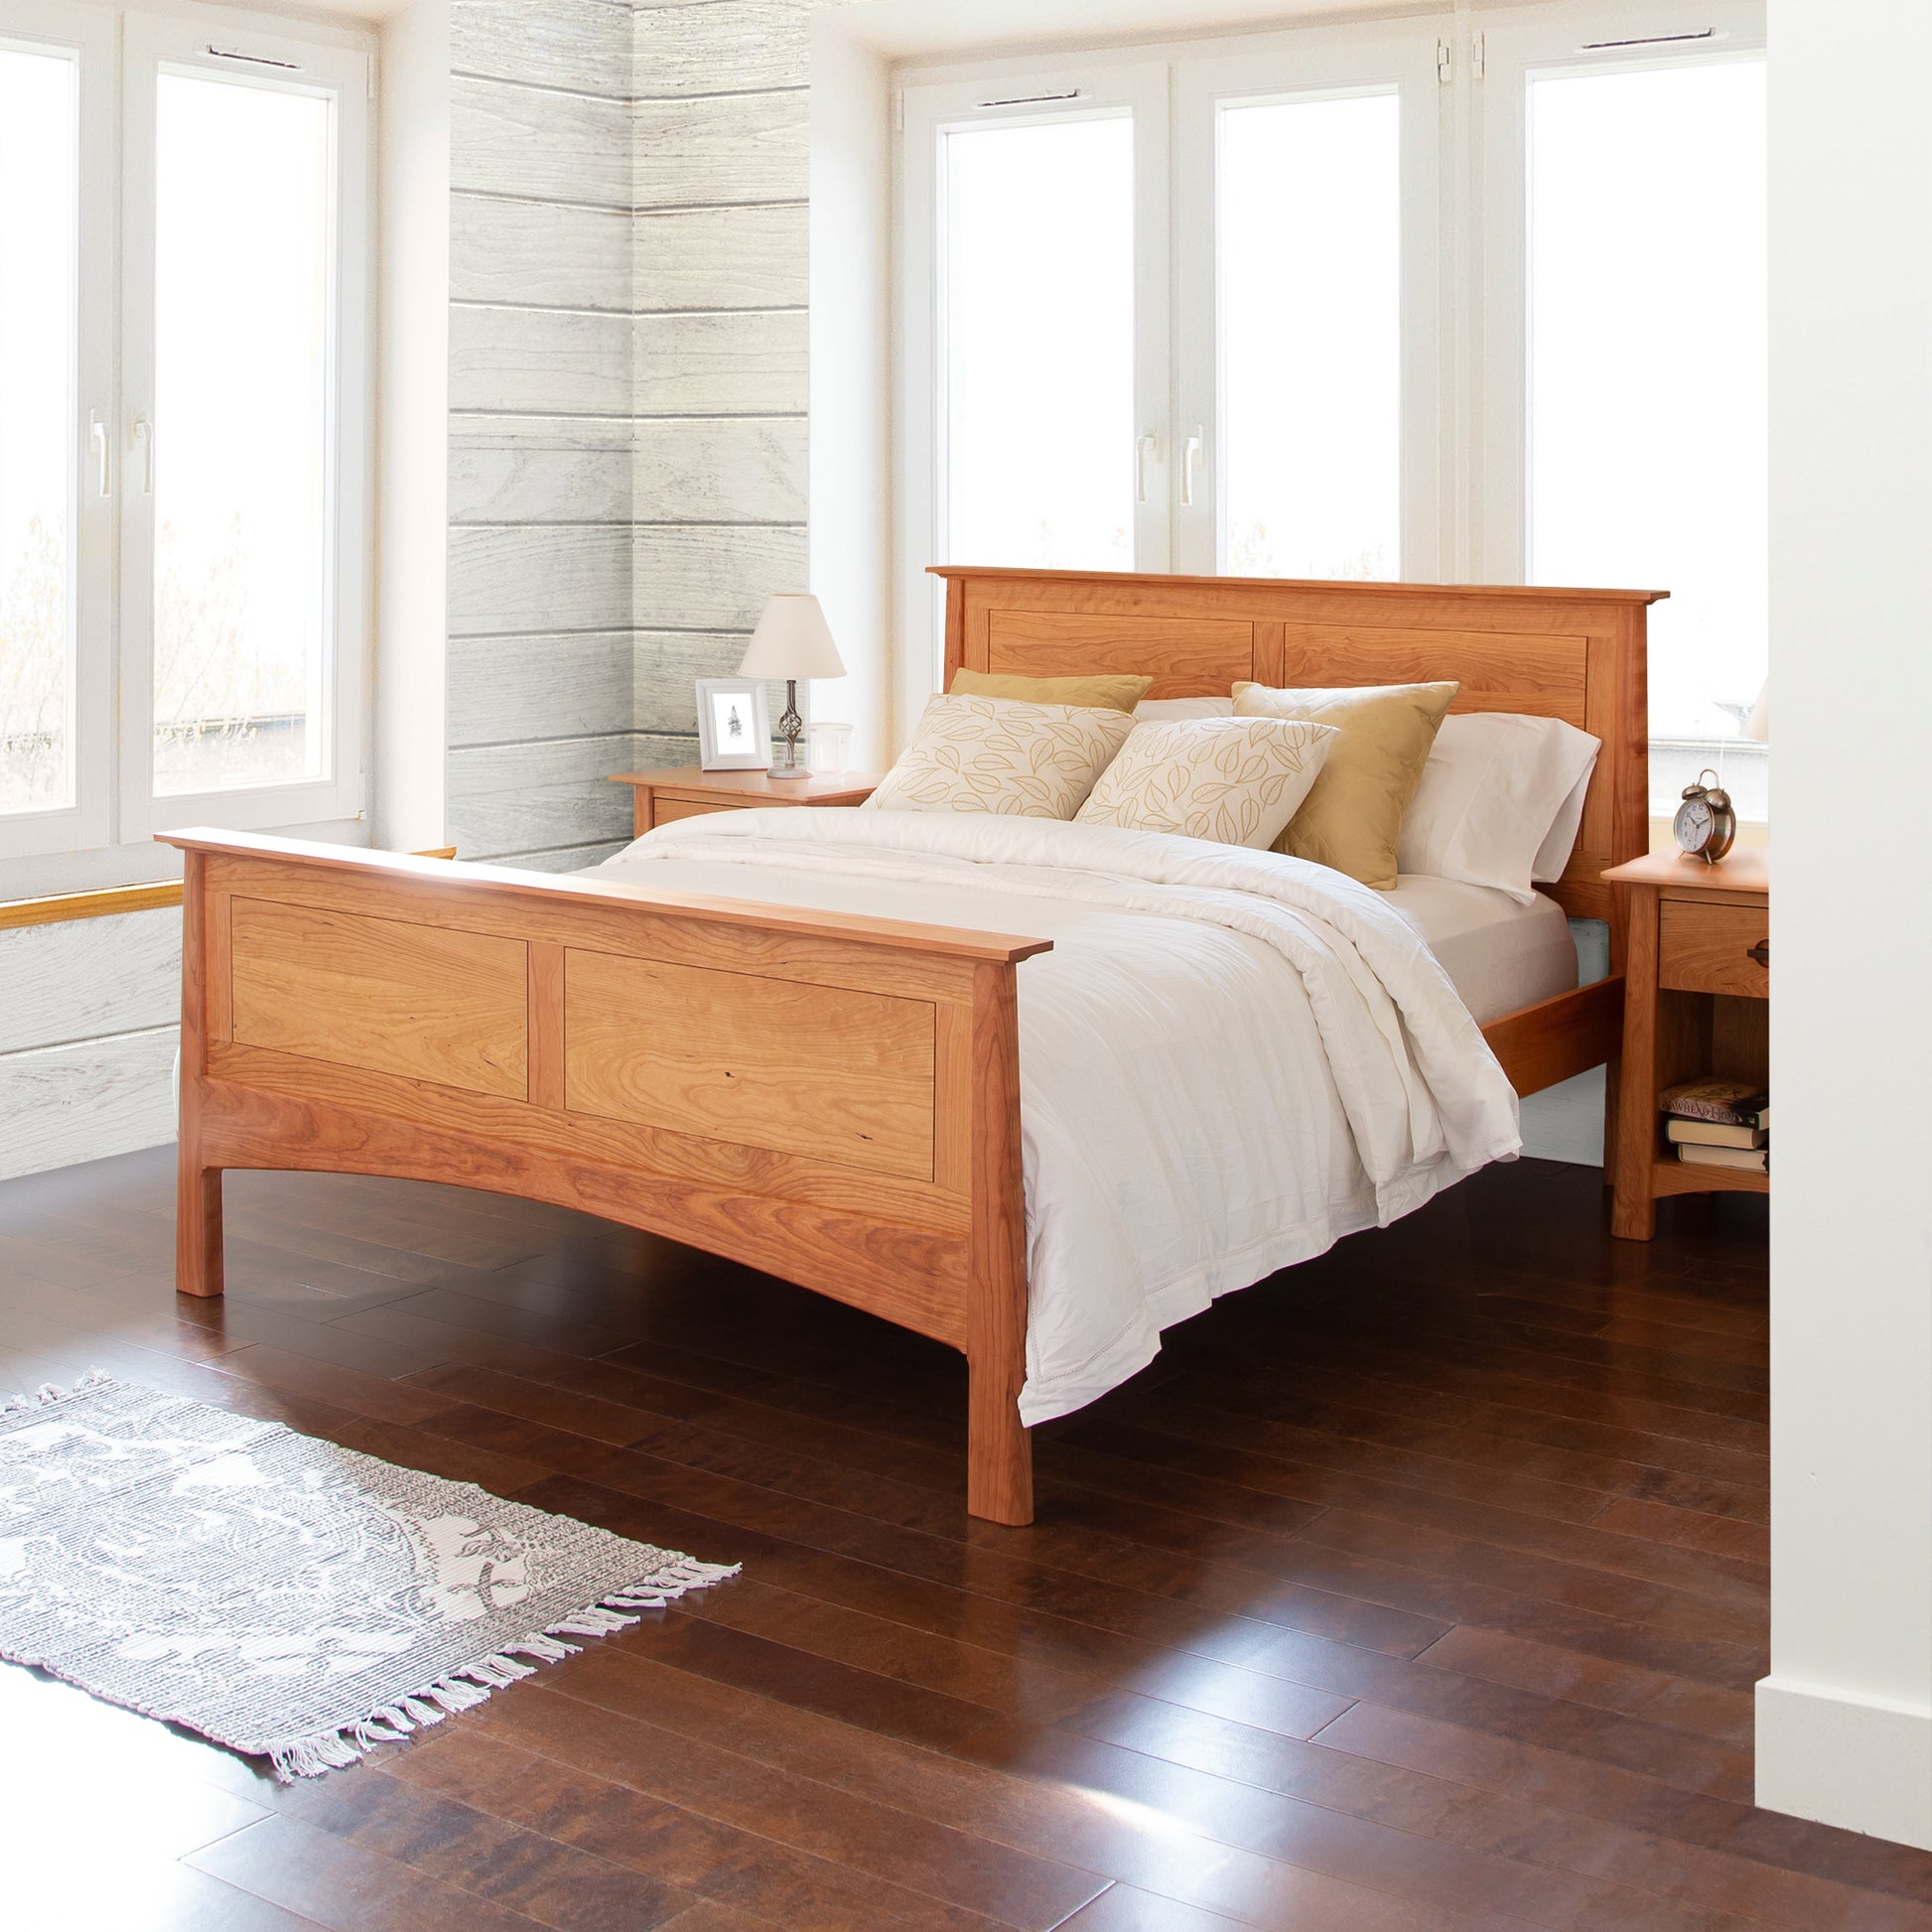 A Maple Corner Woodworks Cherry Moon Panel Bed with white bedding in a bright bedroom, featuring large windows, a gray rug, and a minimalist nightstand. The walls are white and a unique cylindrical gray stone column is visible.